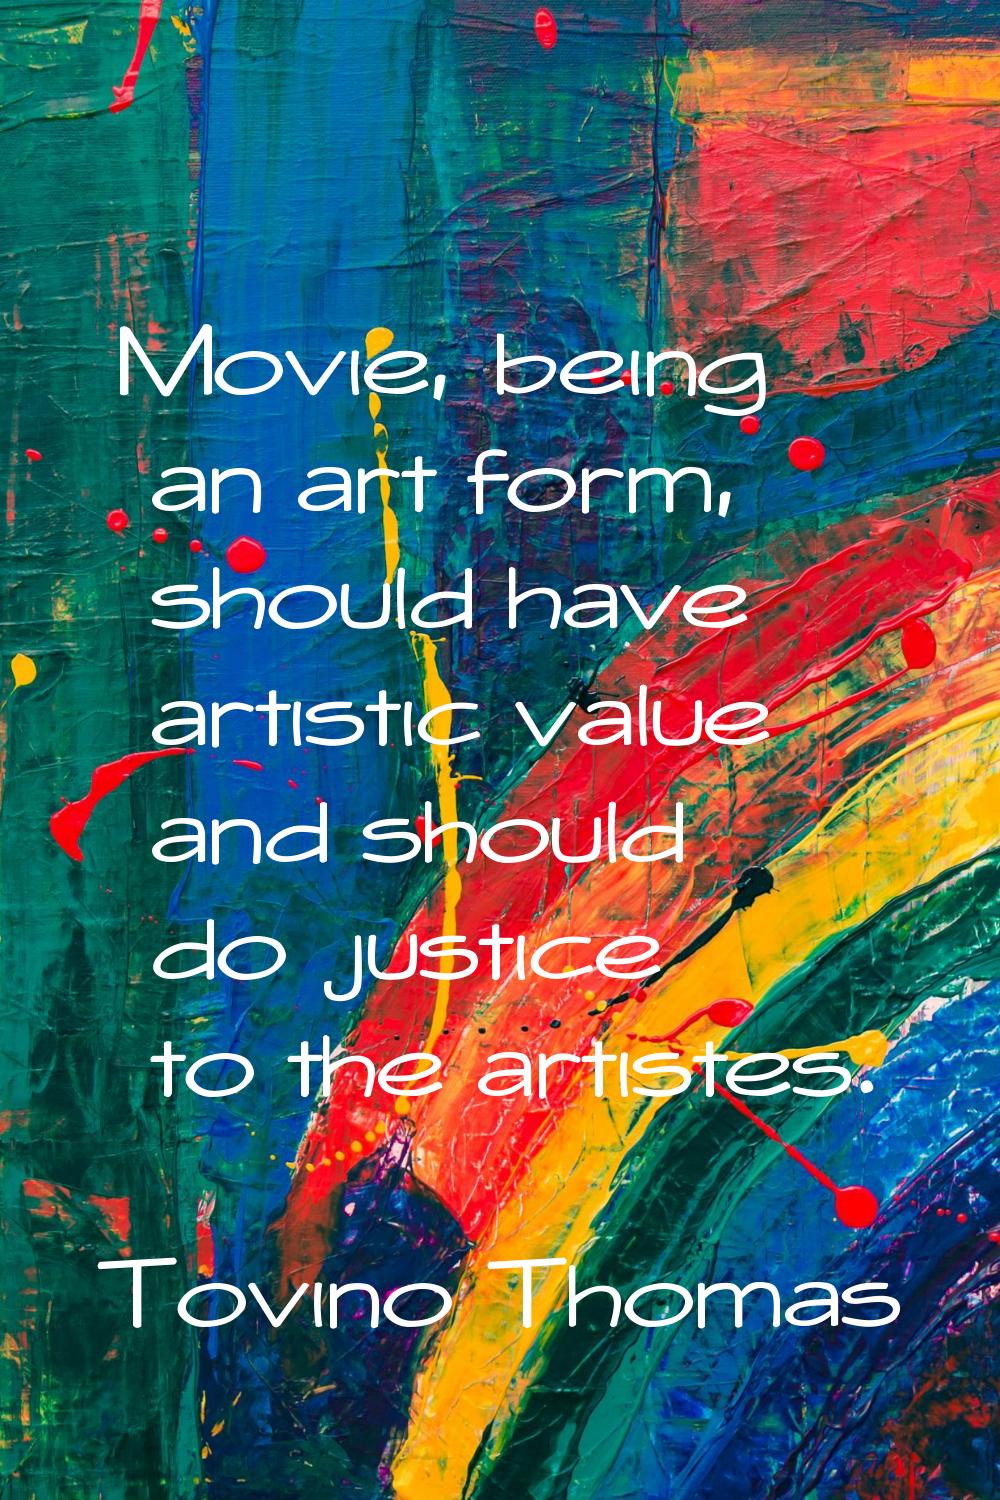 Movie, being an art form, should have artistic value and should do justice to the artistes.